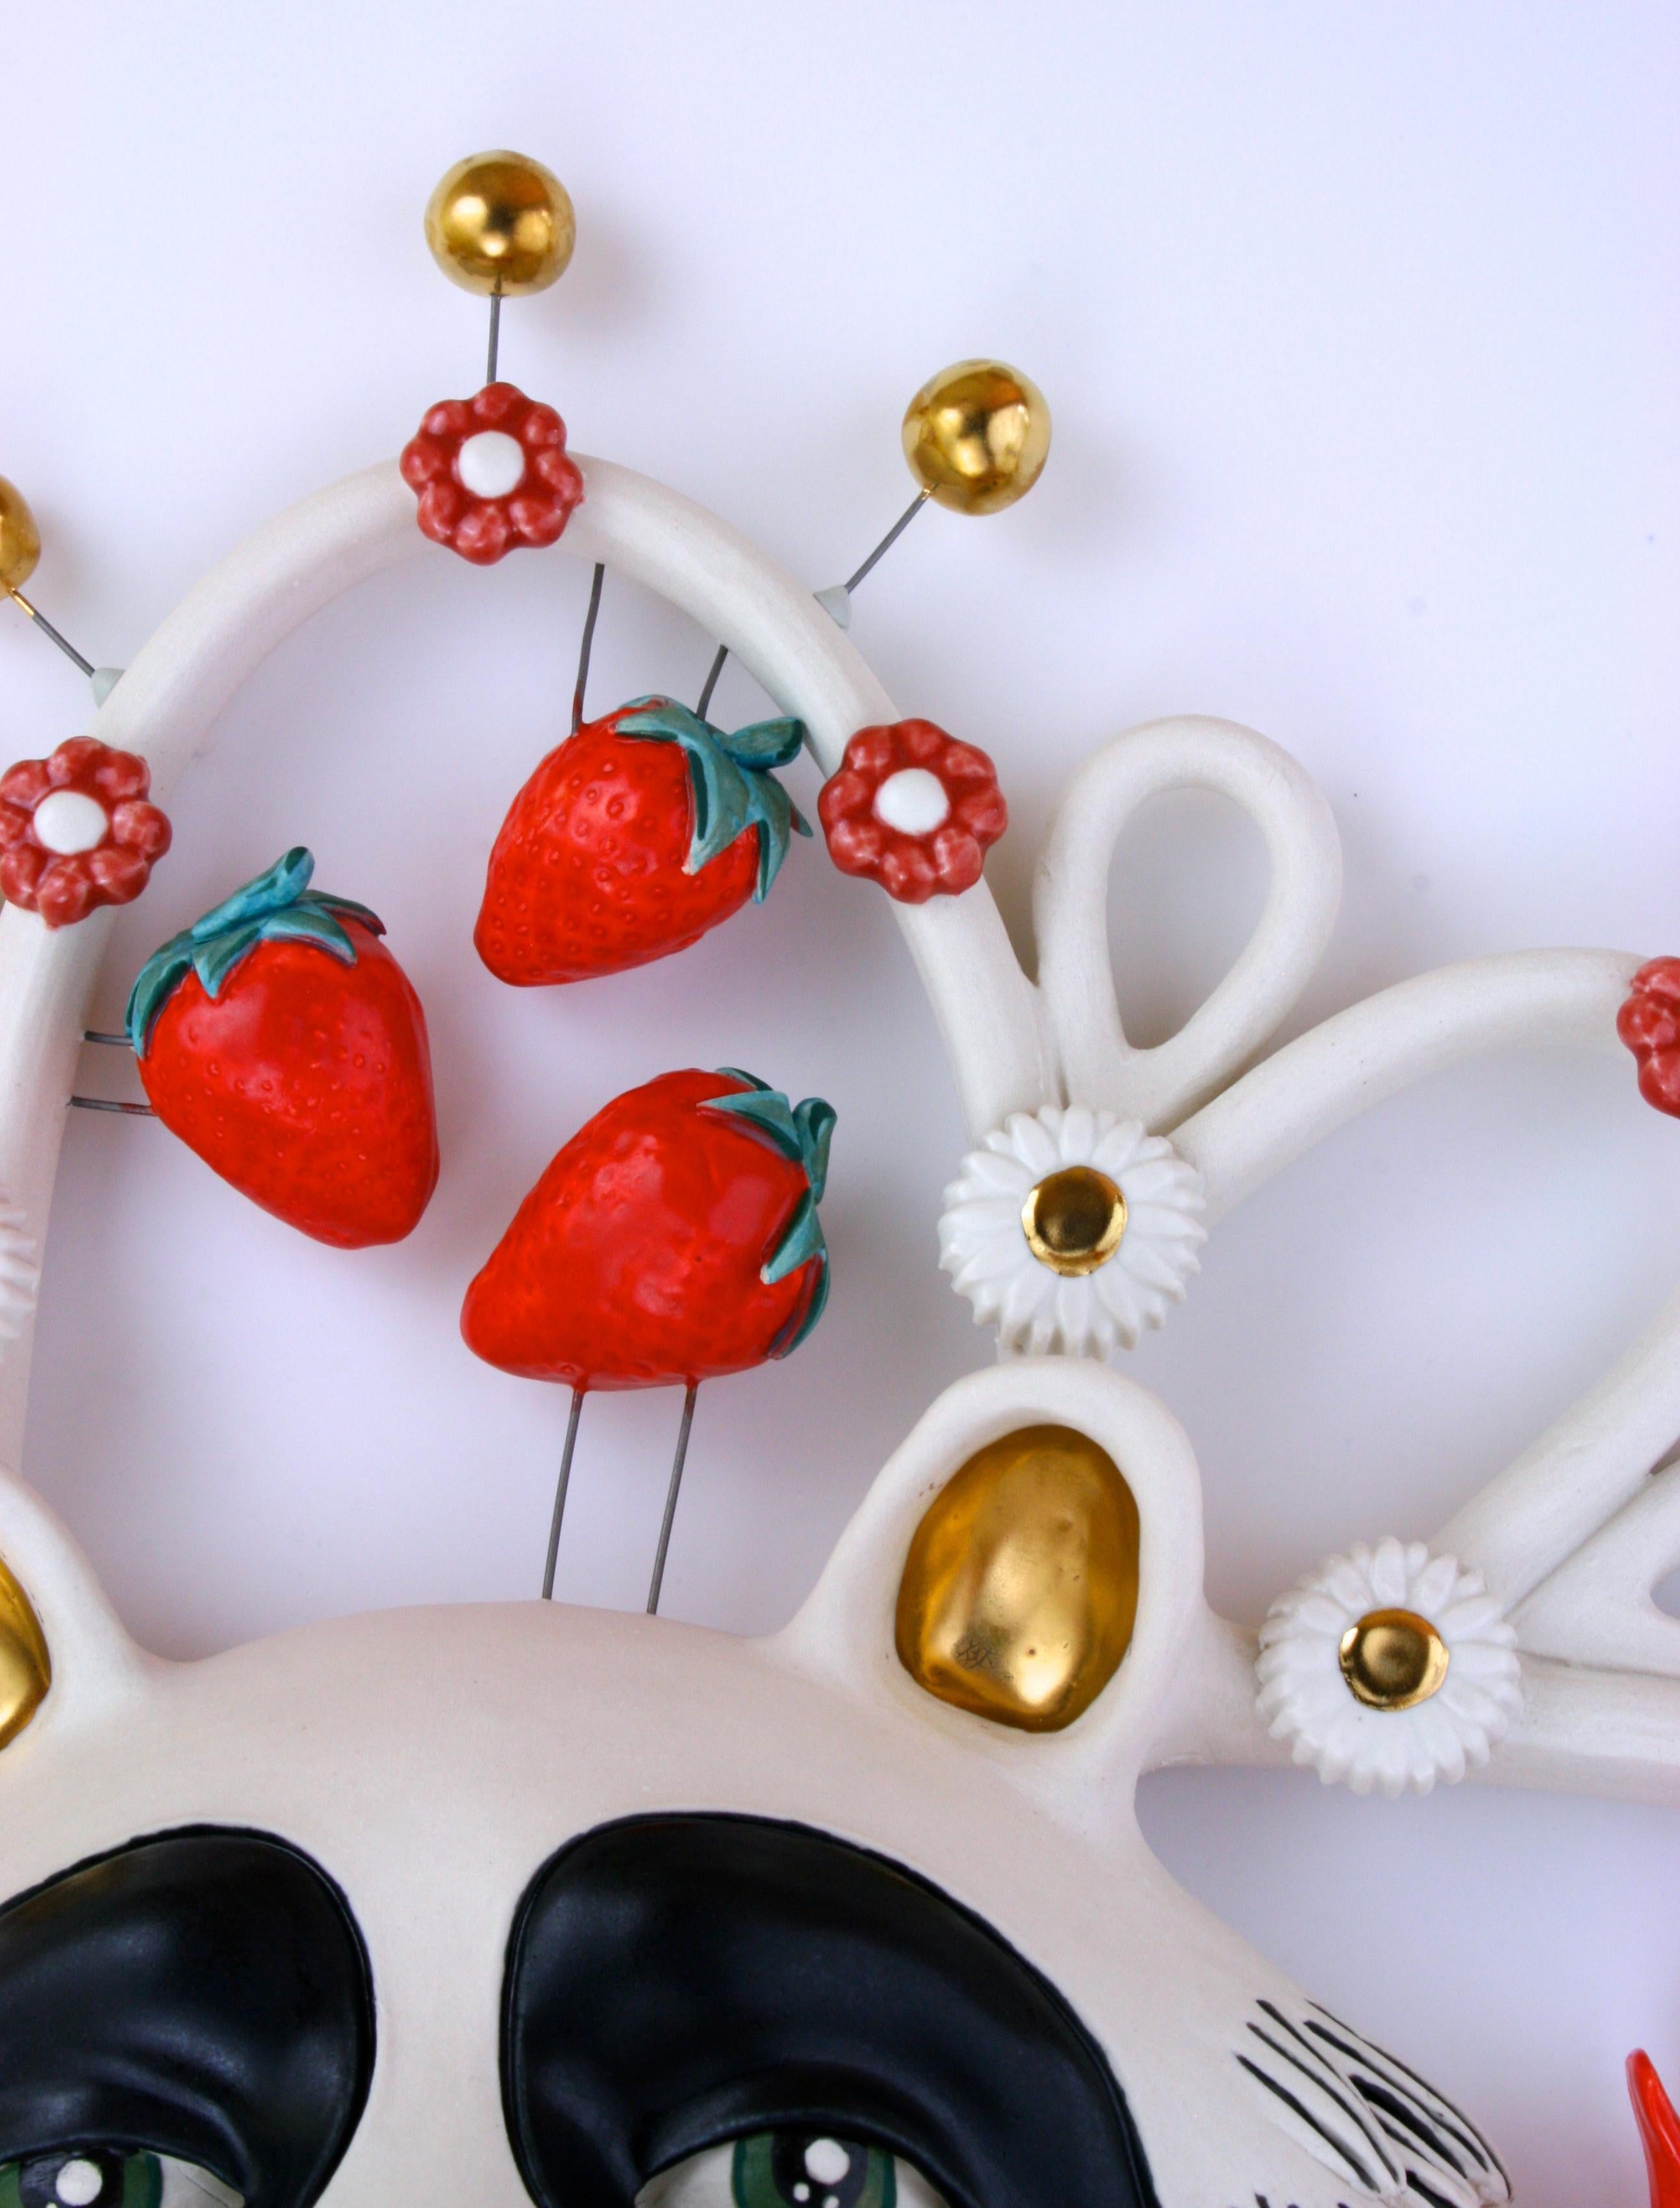 Ceramic sculpture of raccoon, strawberries, cardinals and flowers hand-built with porcelain, nichrome wire, glaze, underglaze and luster

